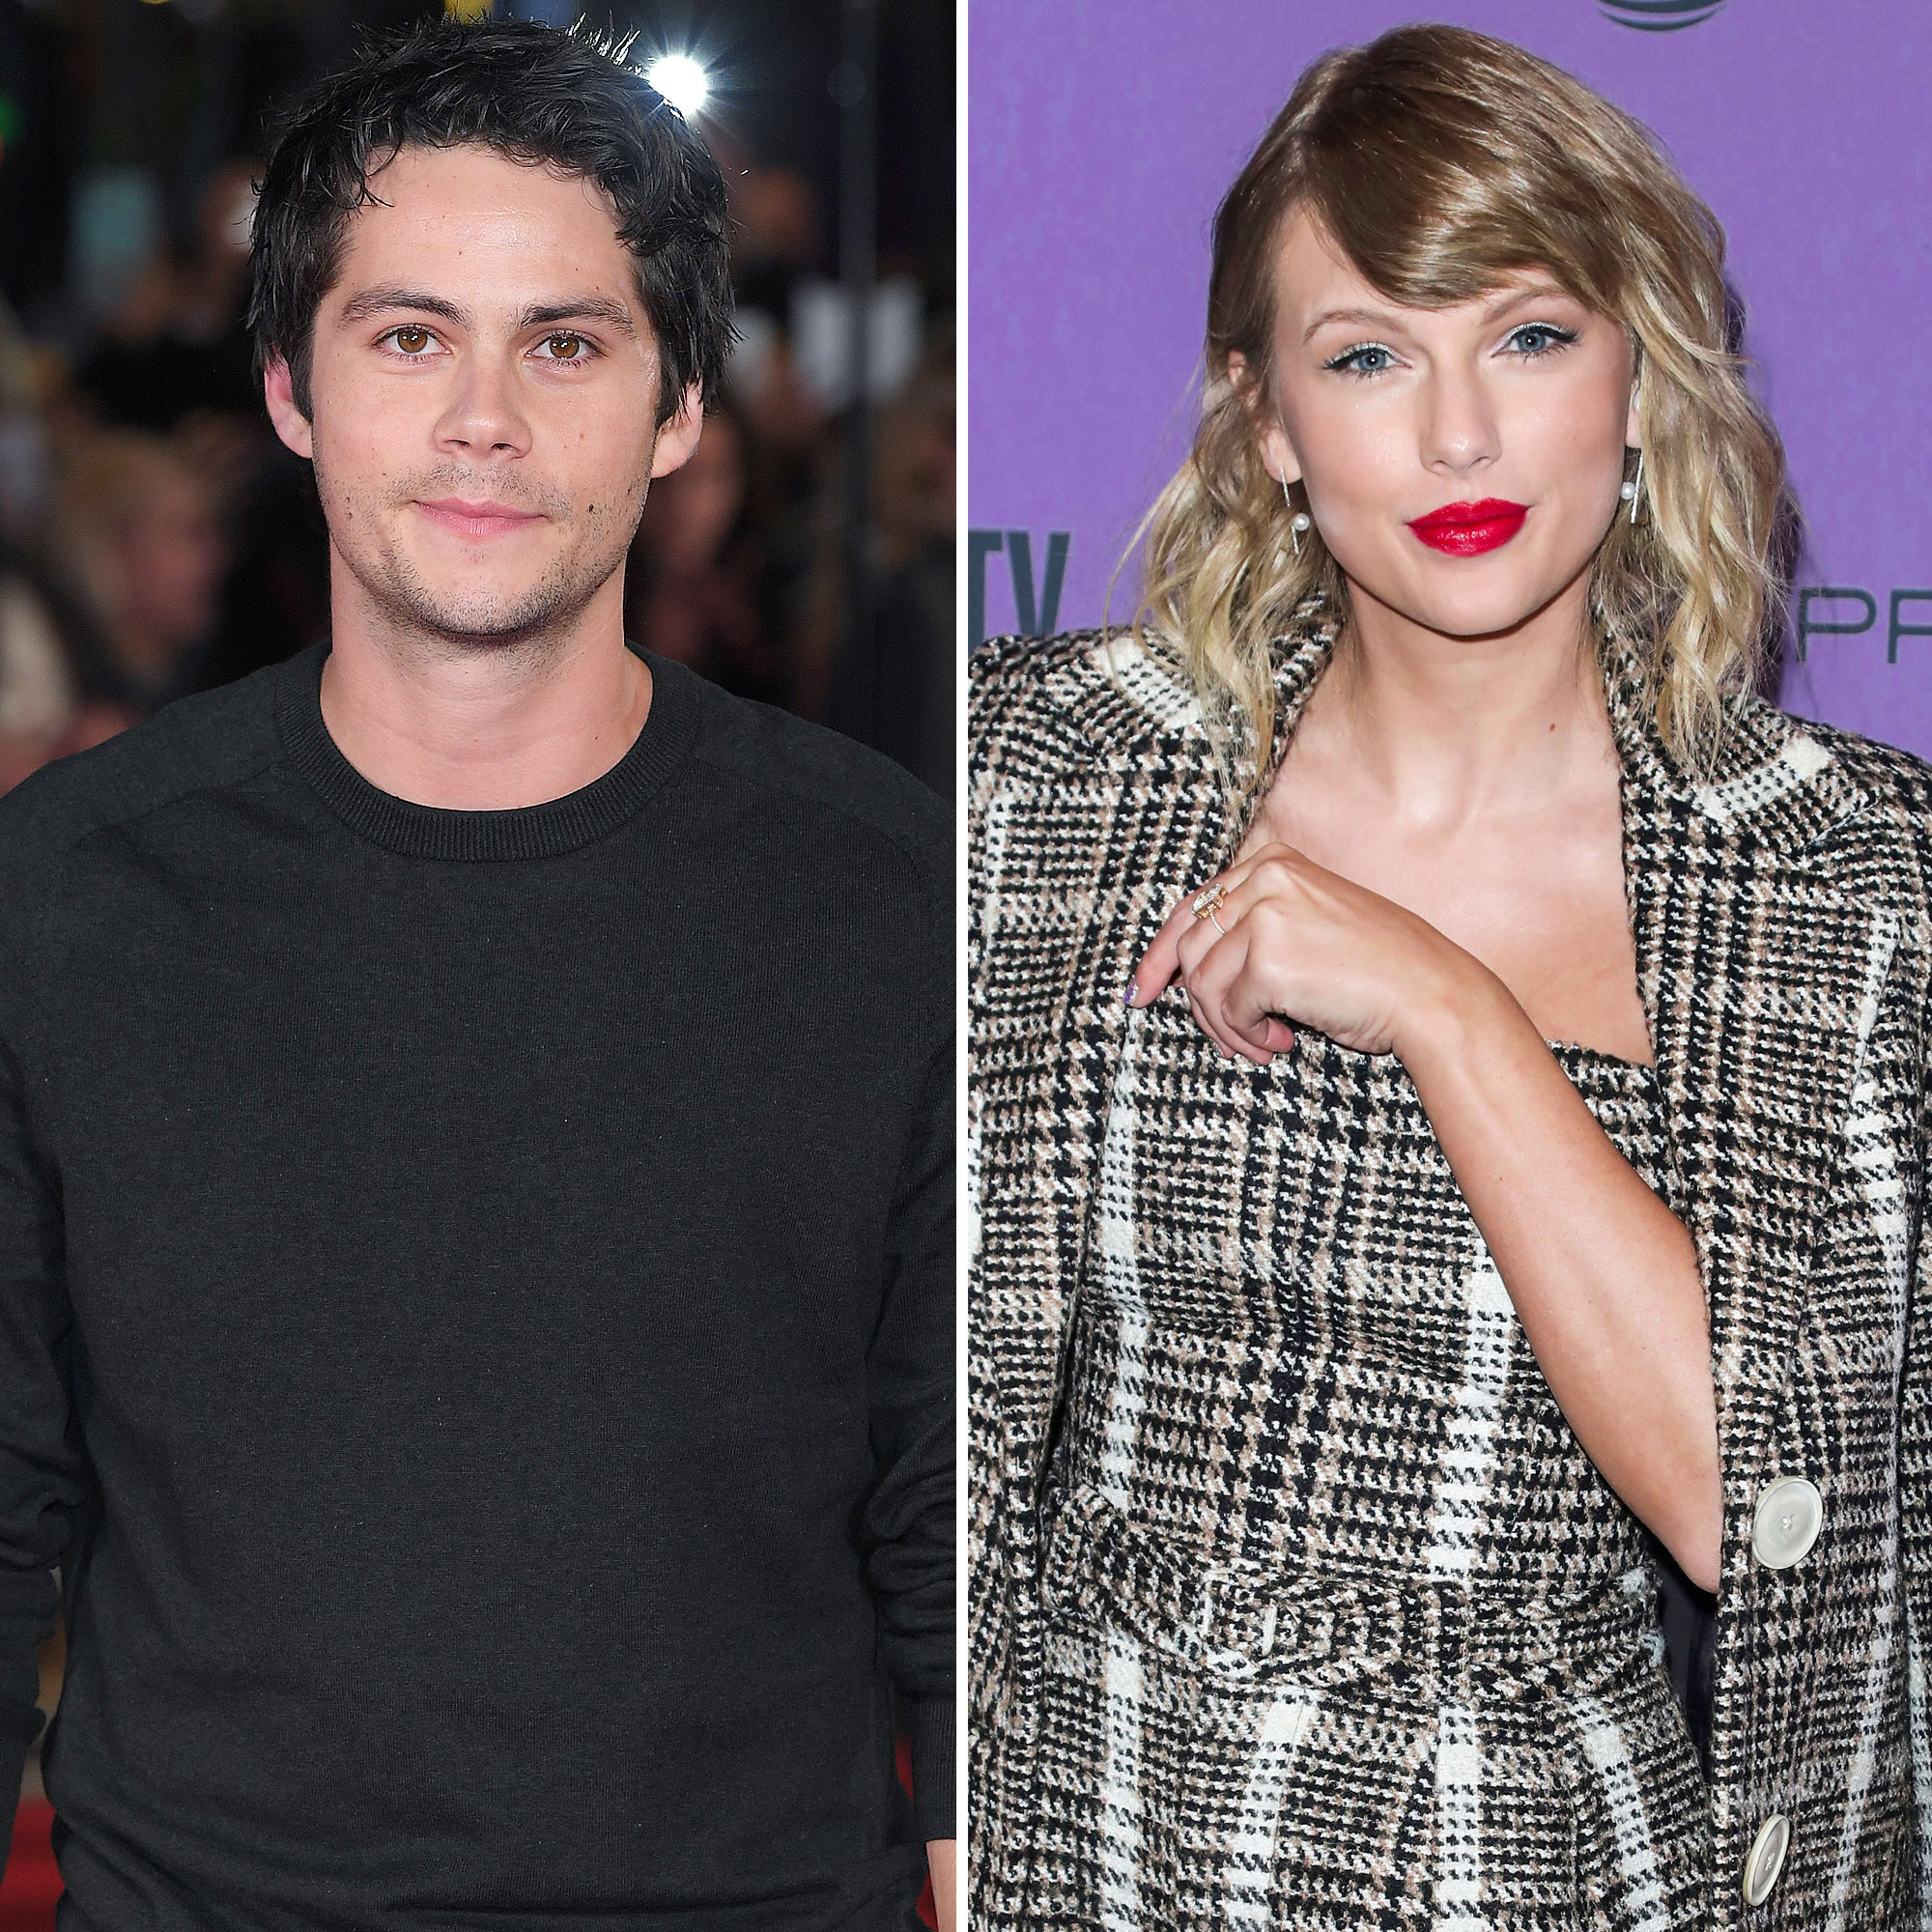 https://www.usmagazine.com/wp-content/uploads/2021/11/Big-Fan-Dylan-OBrien-Shared-Love-Taylor-Swift-Before-All-Too-Well-Gig-0001.jpg?quality=40&strip=all